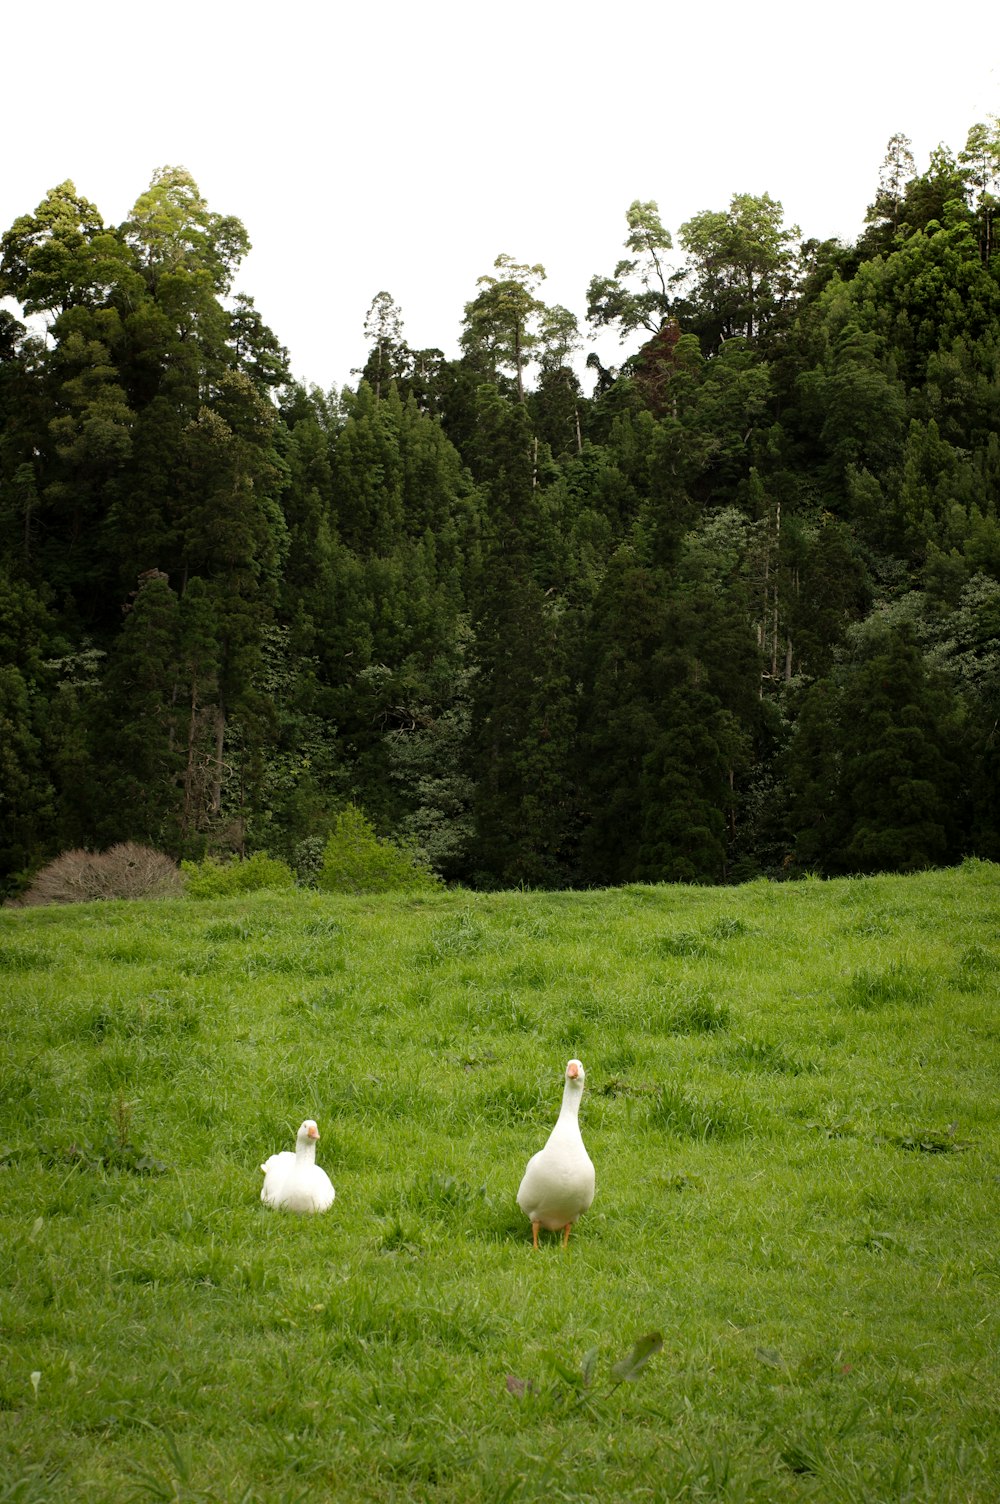 a couple of geese in a grassy field with trees in the background